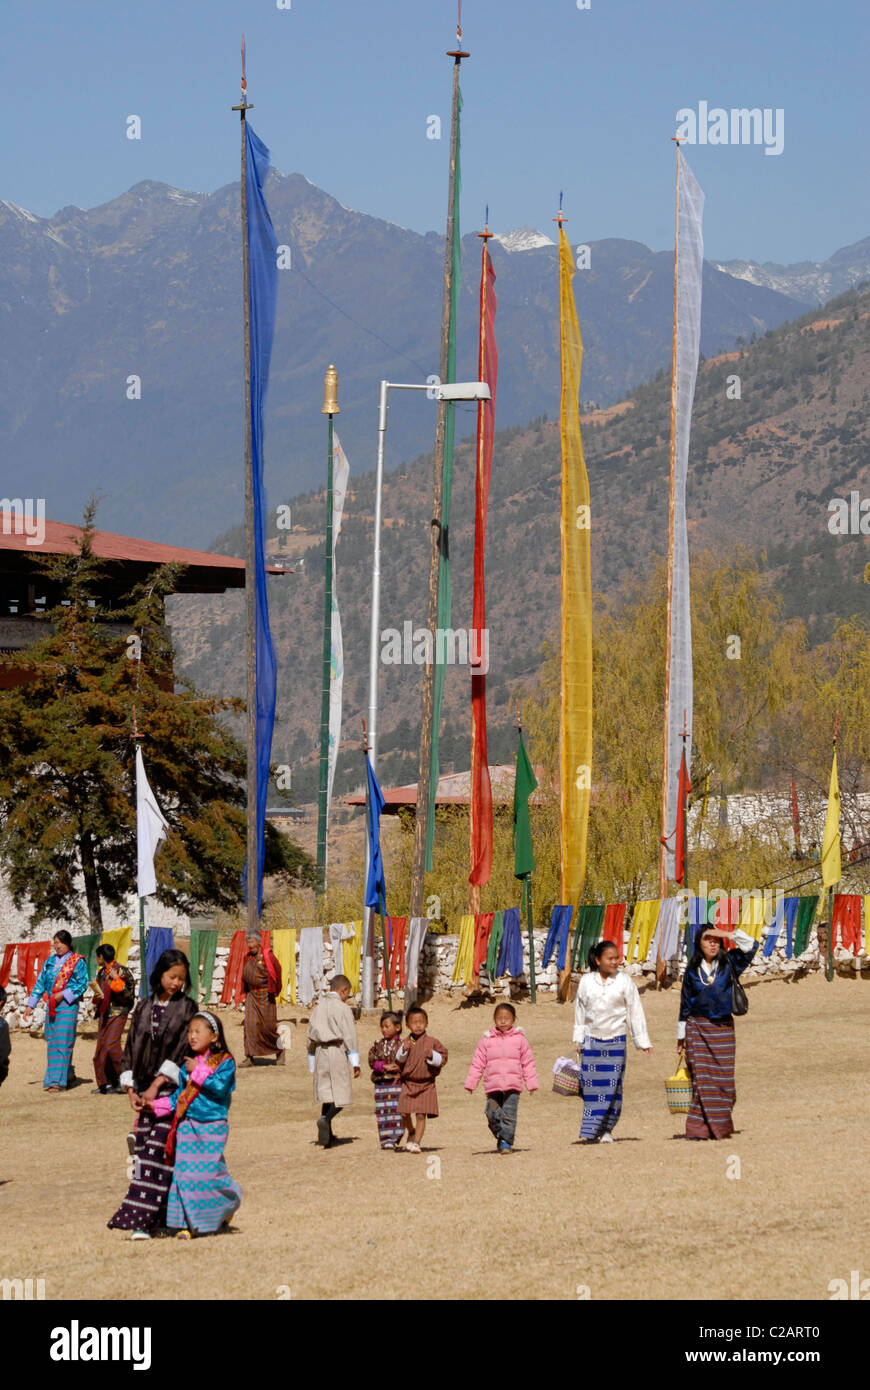 People arriving at the Paro Festival (Paro Tsechu), with prayer flags in front of the himalayan mountains, Paro, Bhutan Stock Photo